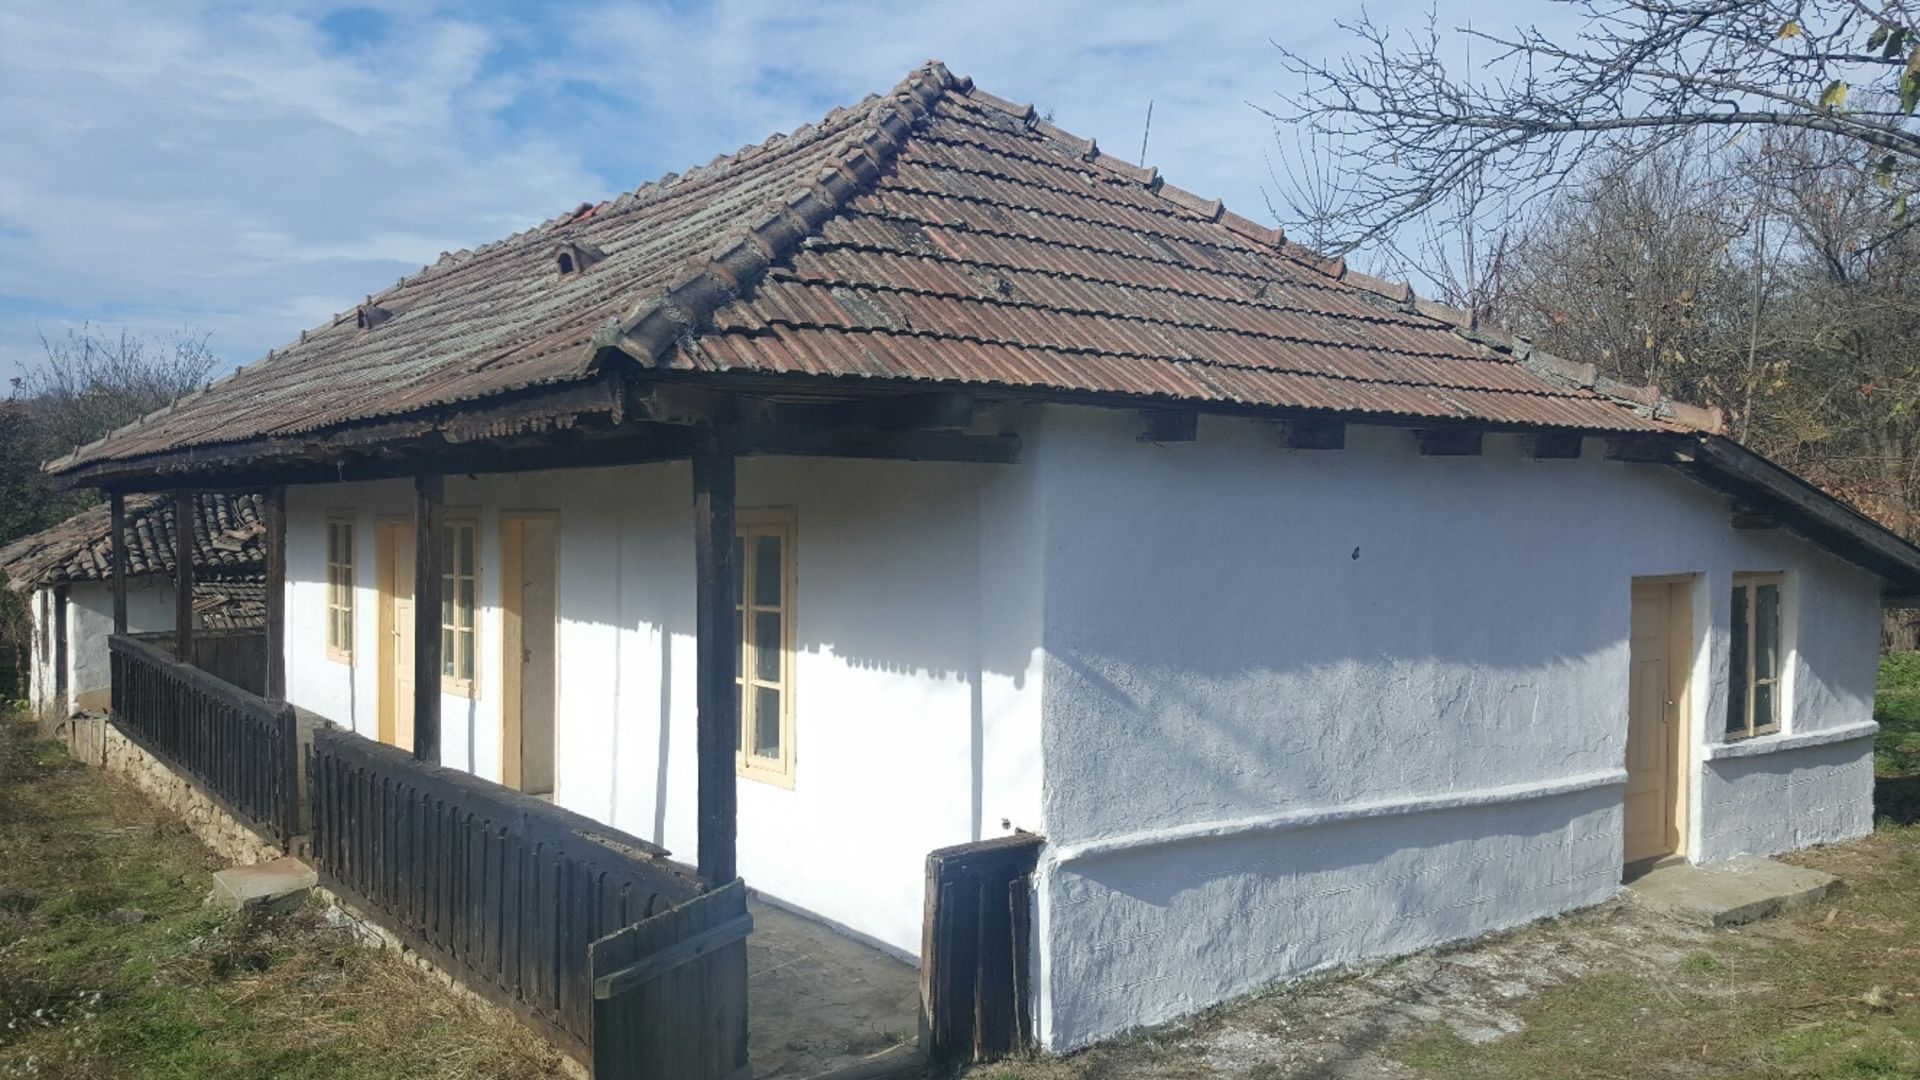 VERY SOLID 3 BED GERMAN COTTAGE WITH ABOUT 2 ACRES OF LAND AND RIVER, NOT FAR FROM BULGARIAN COAST - Image 4 of 34